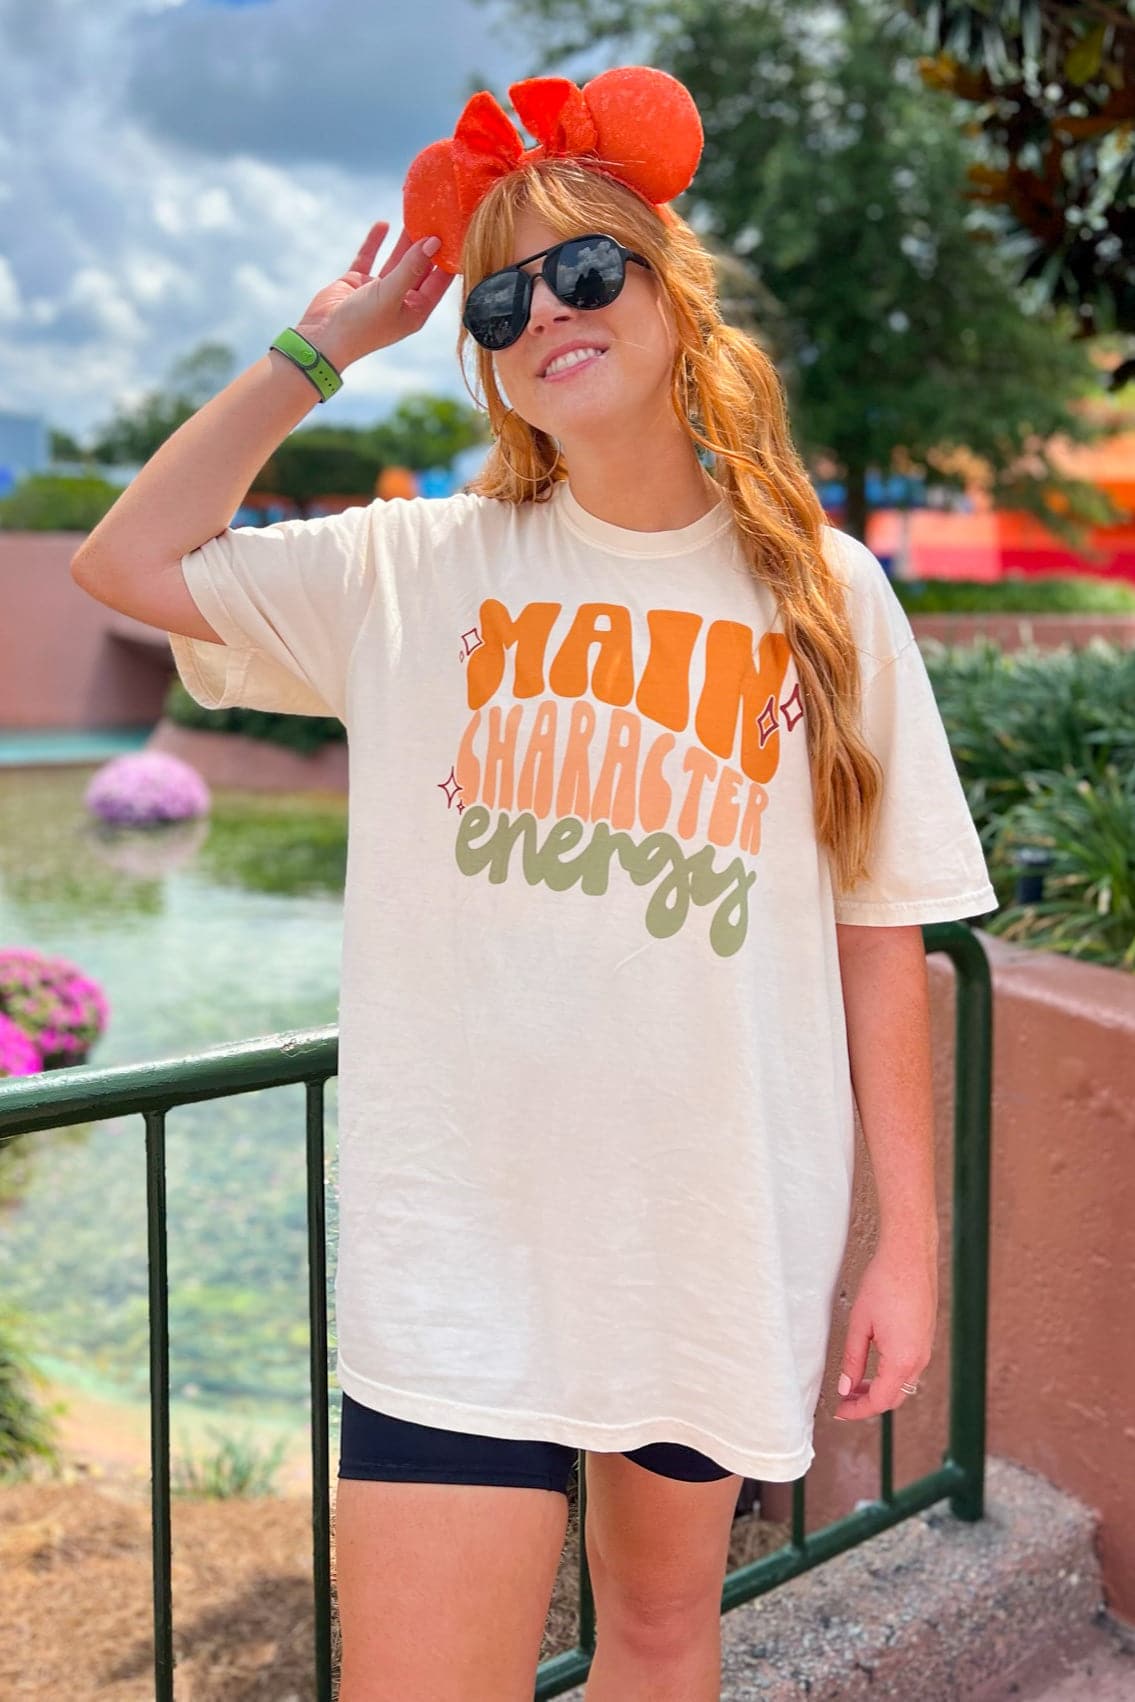  Main Character Energy Oversized Graphic Tee - Madison and Mallory